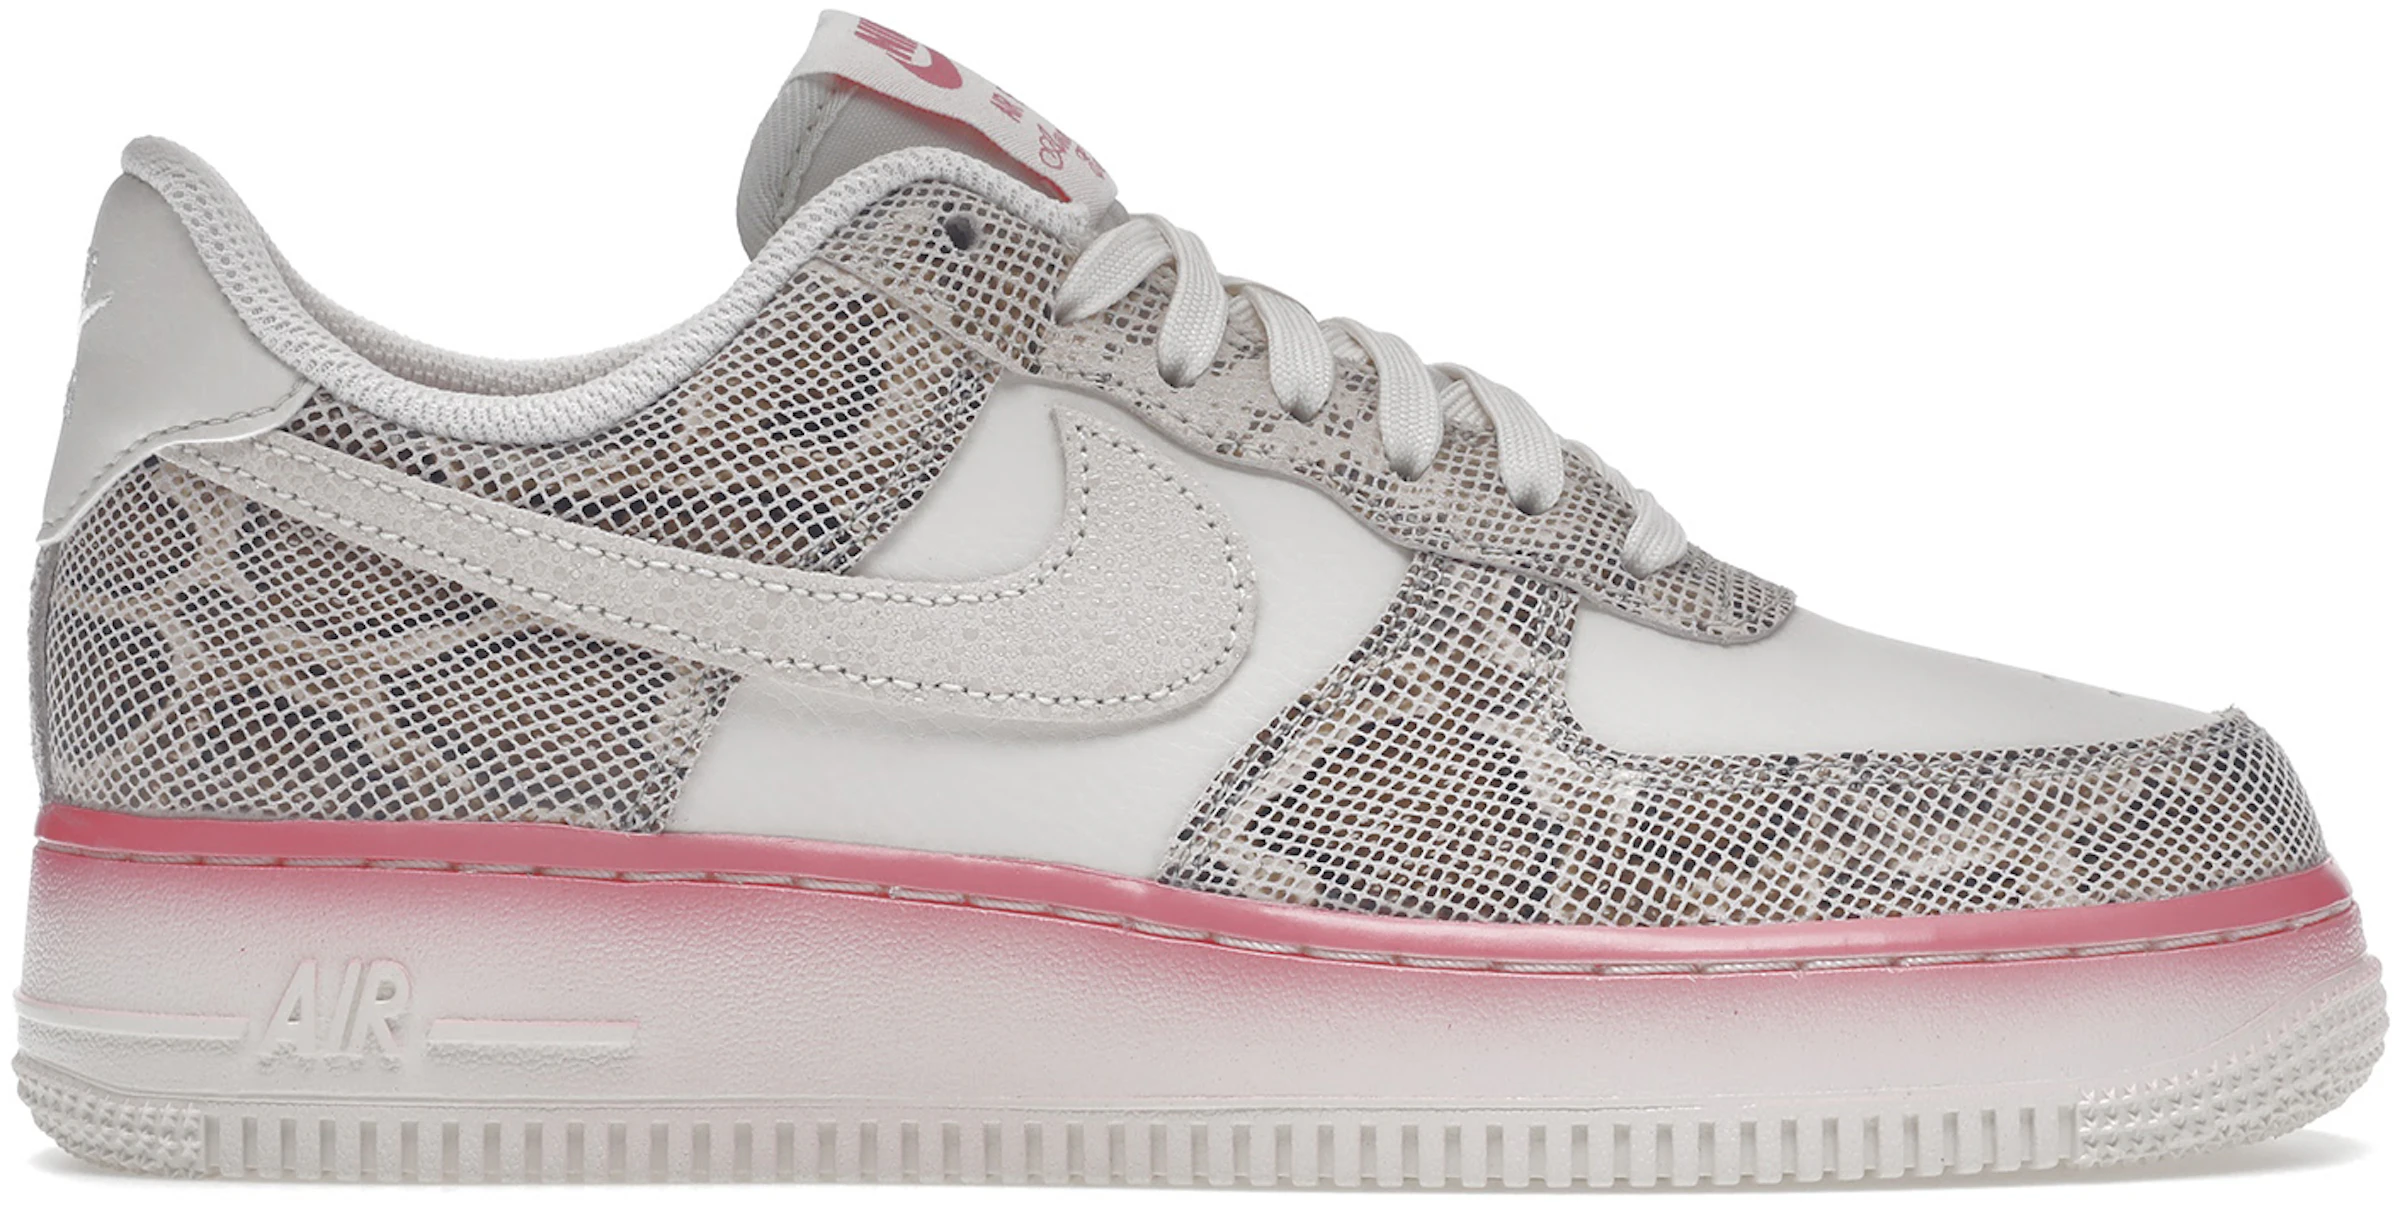 Nike Air Force 1 Low Our 1 Snakeskin (W) DV1031-030 -